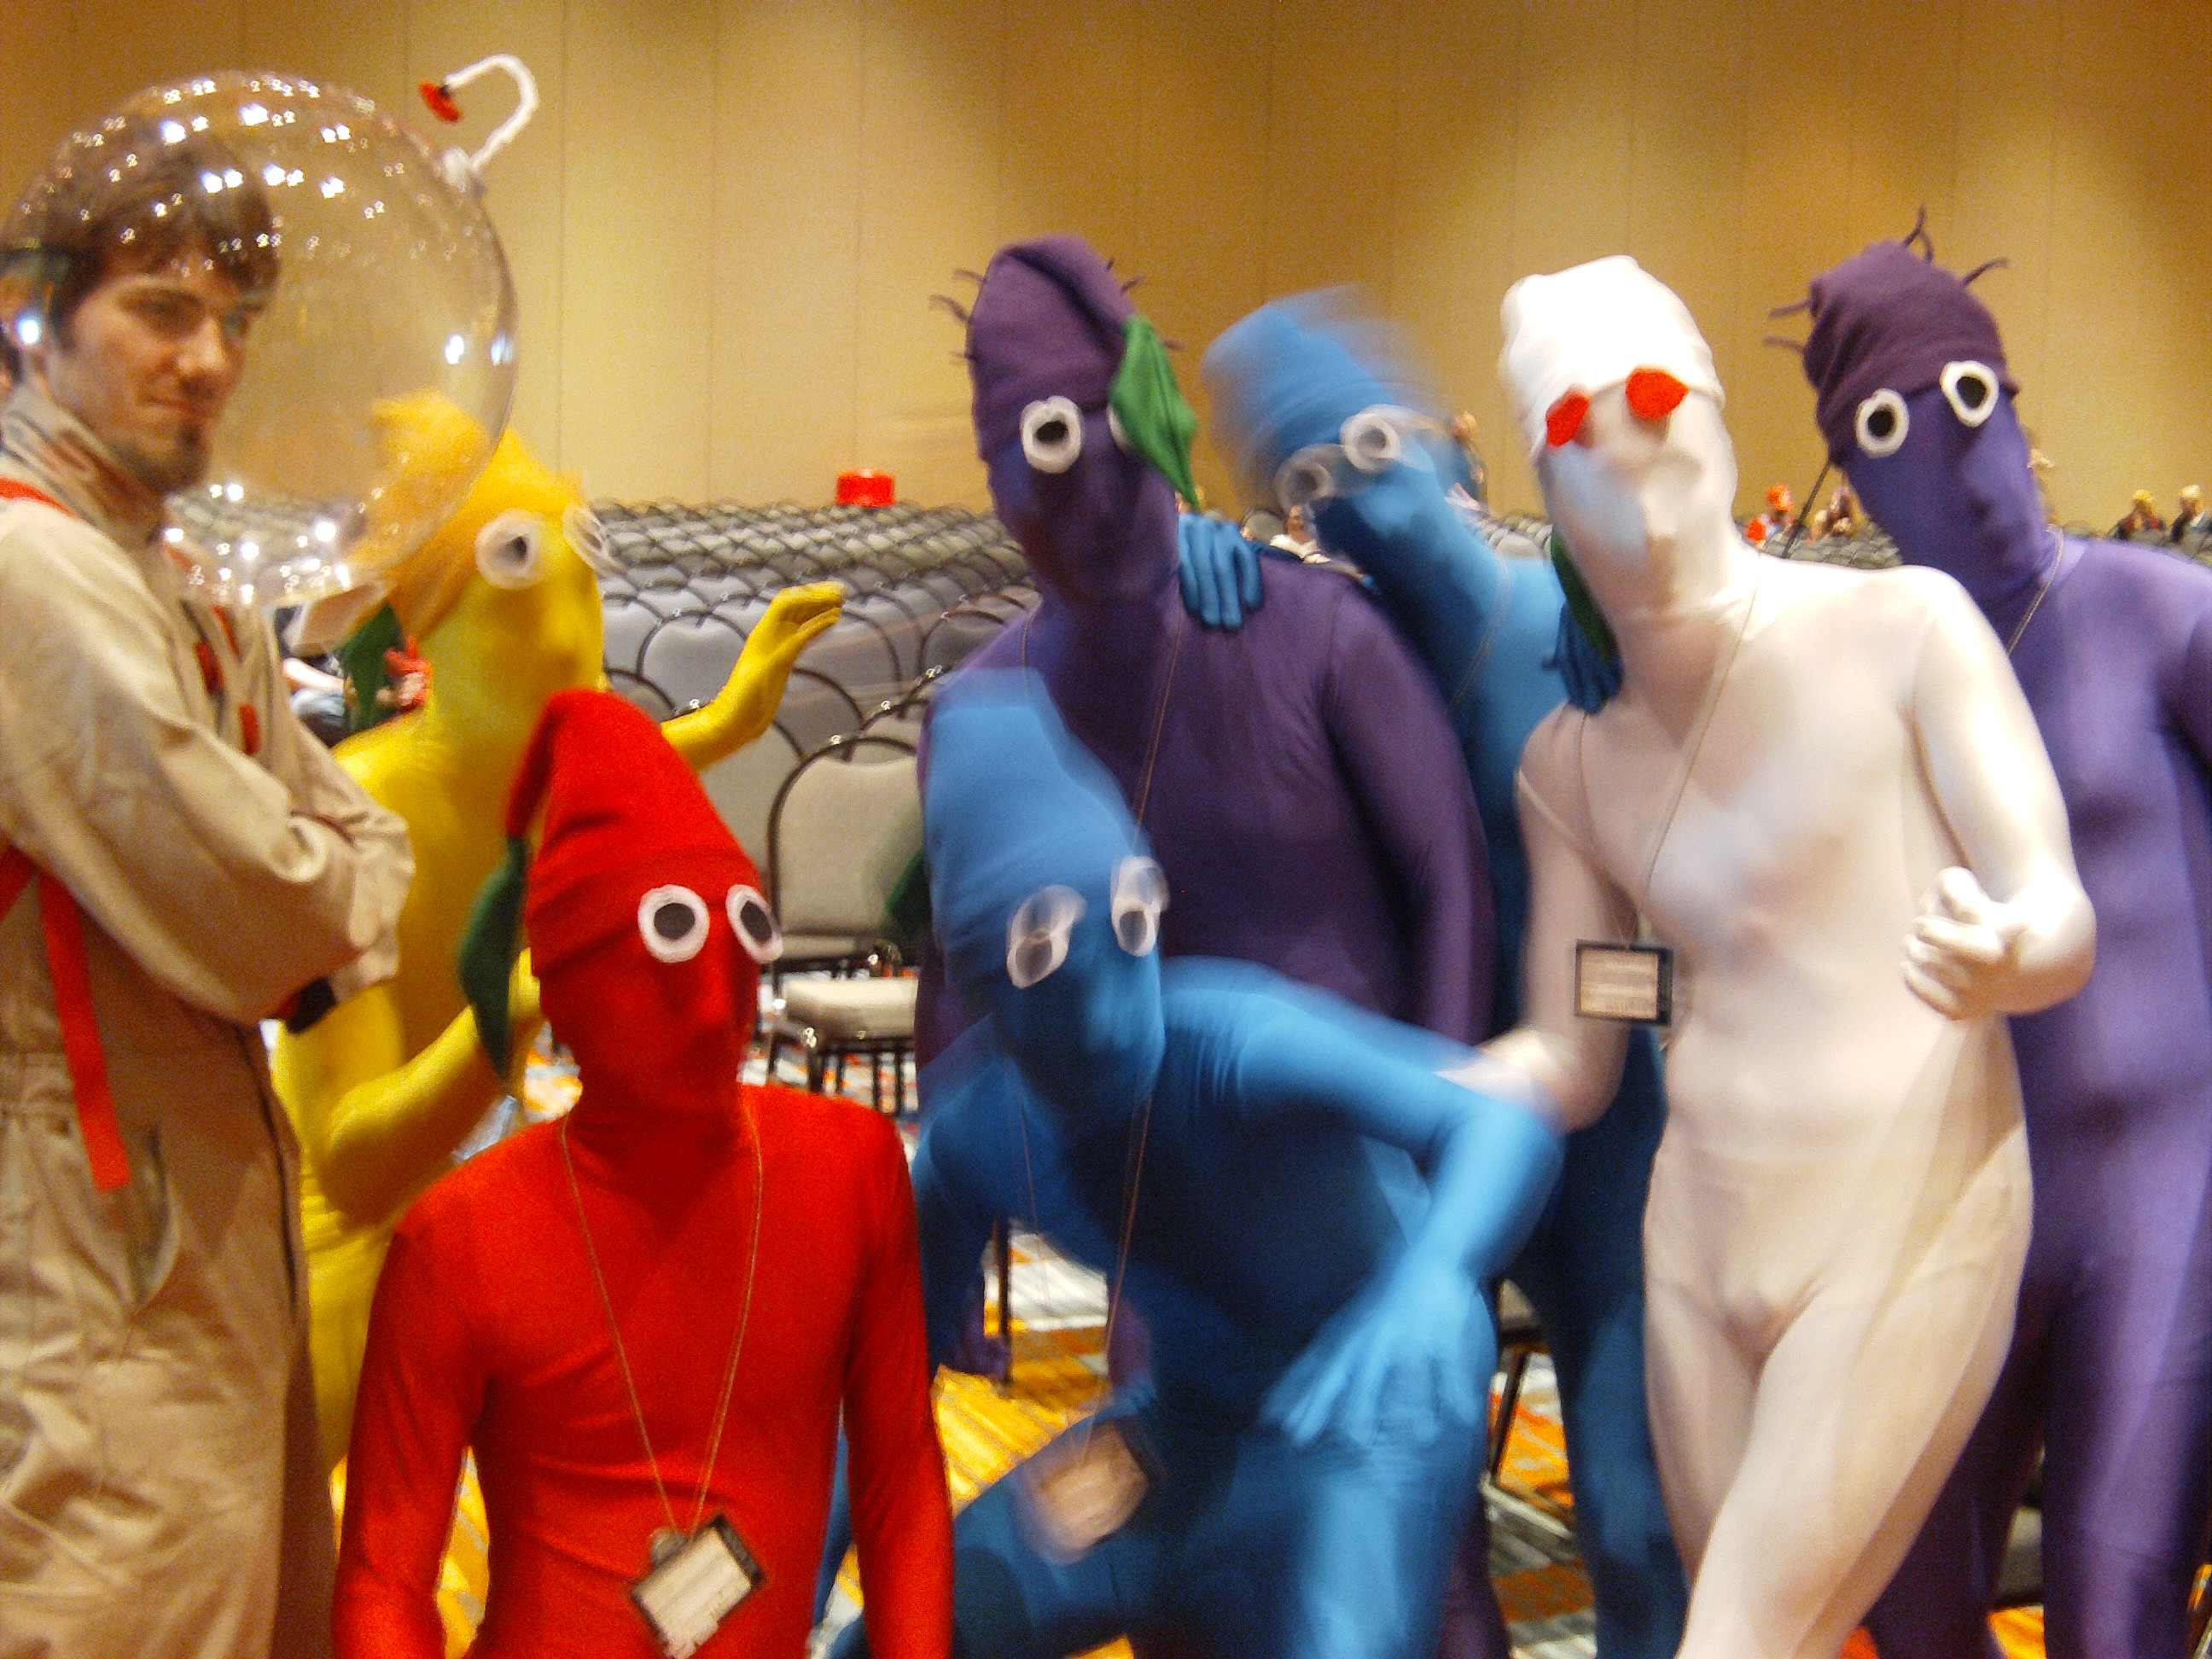 connecticon_2011___pikmin_by_videogamestupid-d5t4xto.jpg